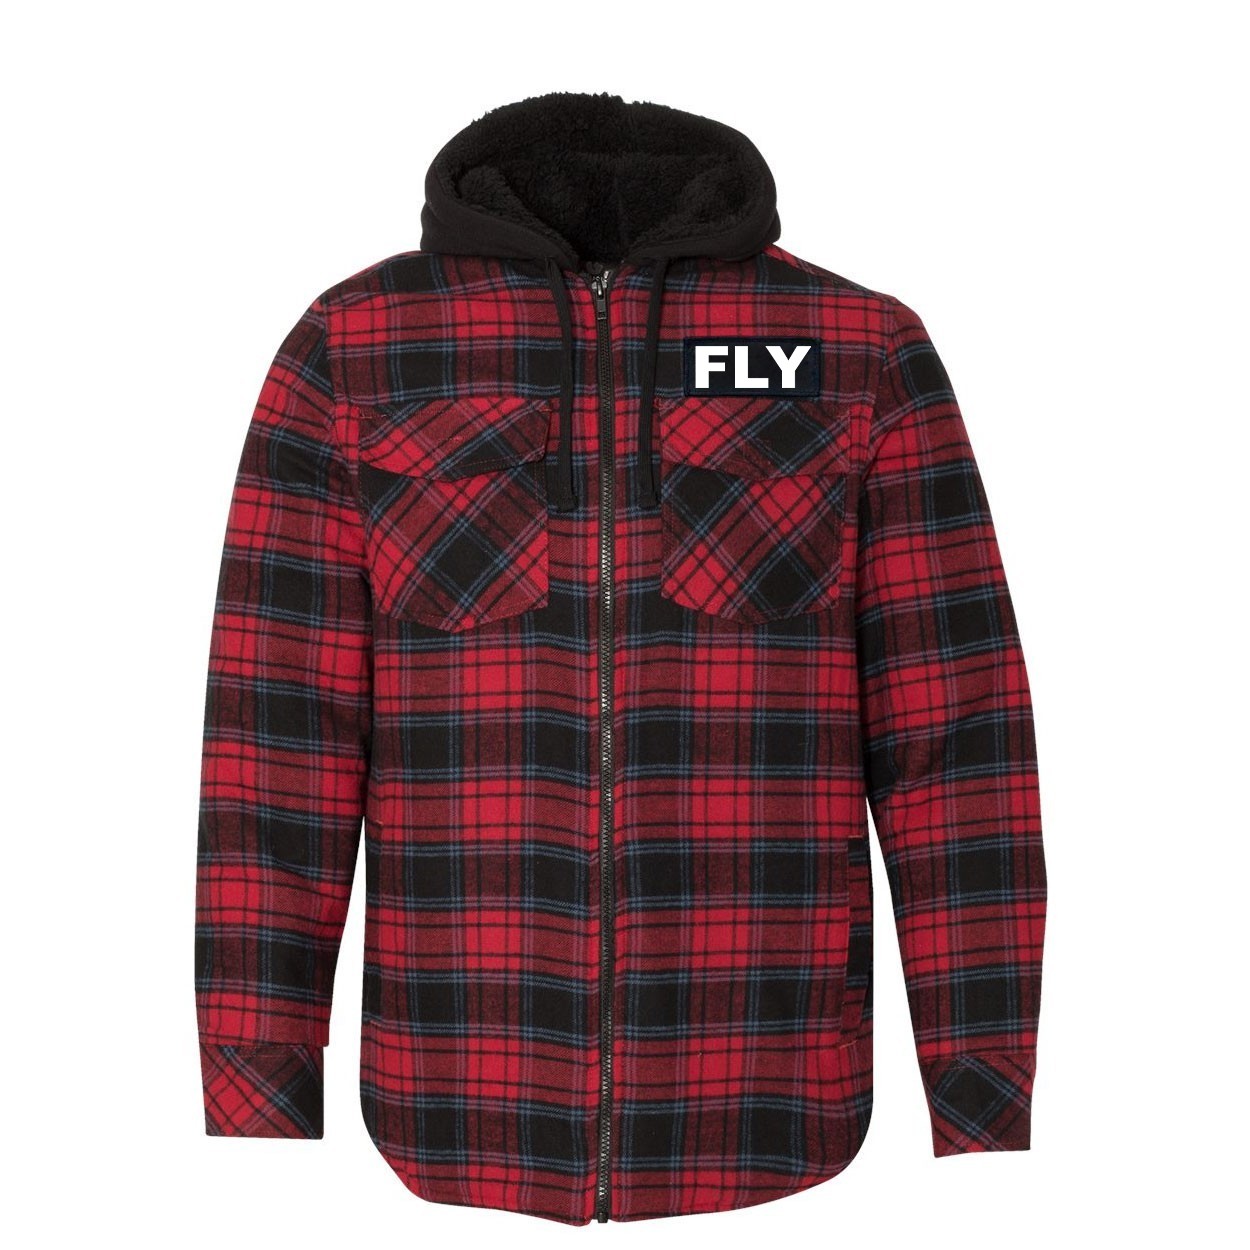 Fly Brand Logo Classic Unisex Full Zip Woven Patch Hooded Flannel Jacket Red/Black Buffalo (White Logo)